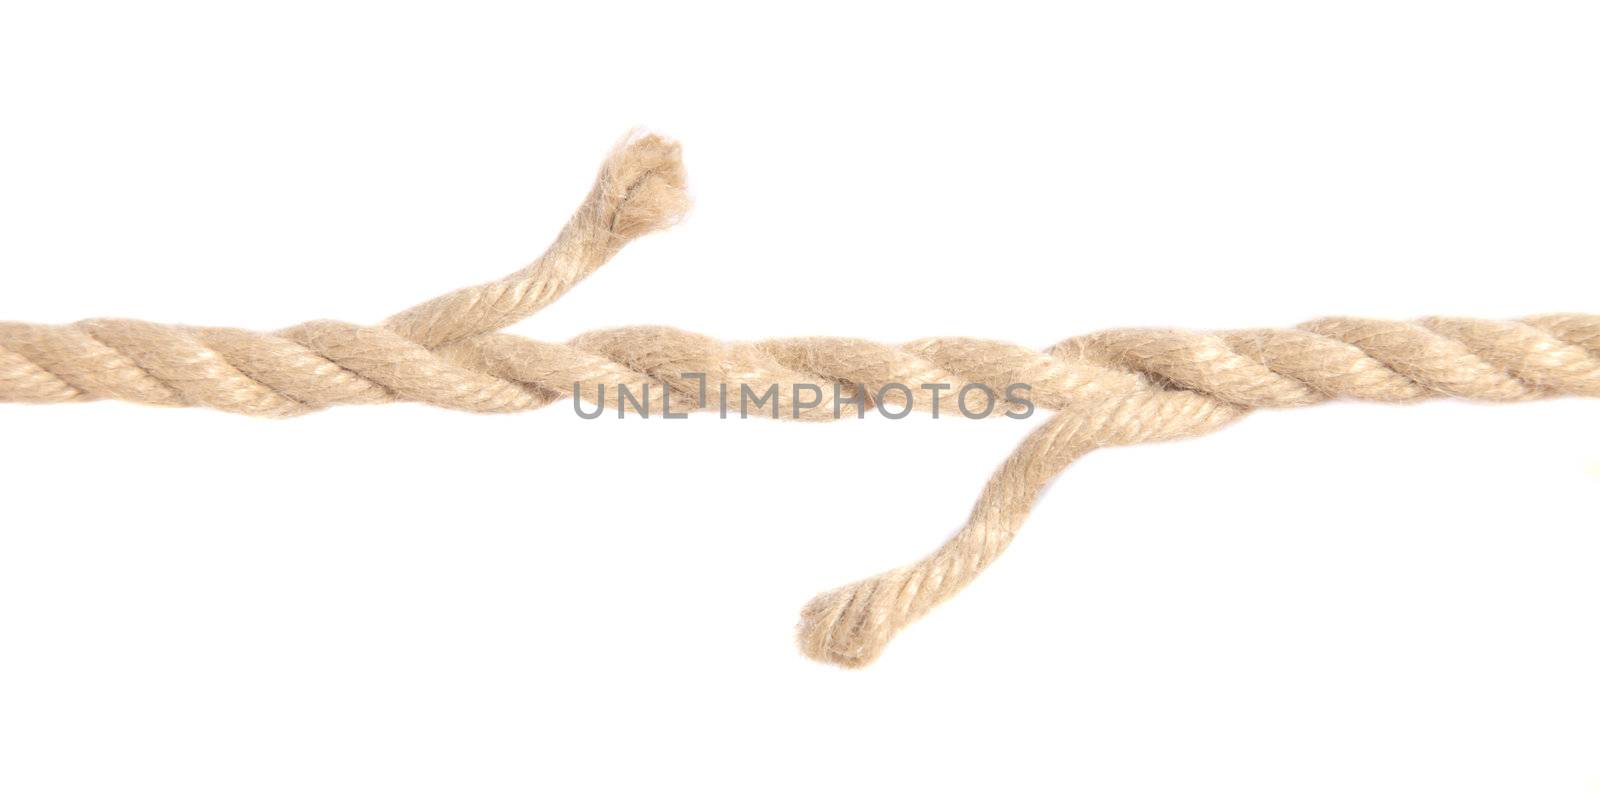 Hemp rope right before ripping apart. All on white background.